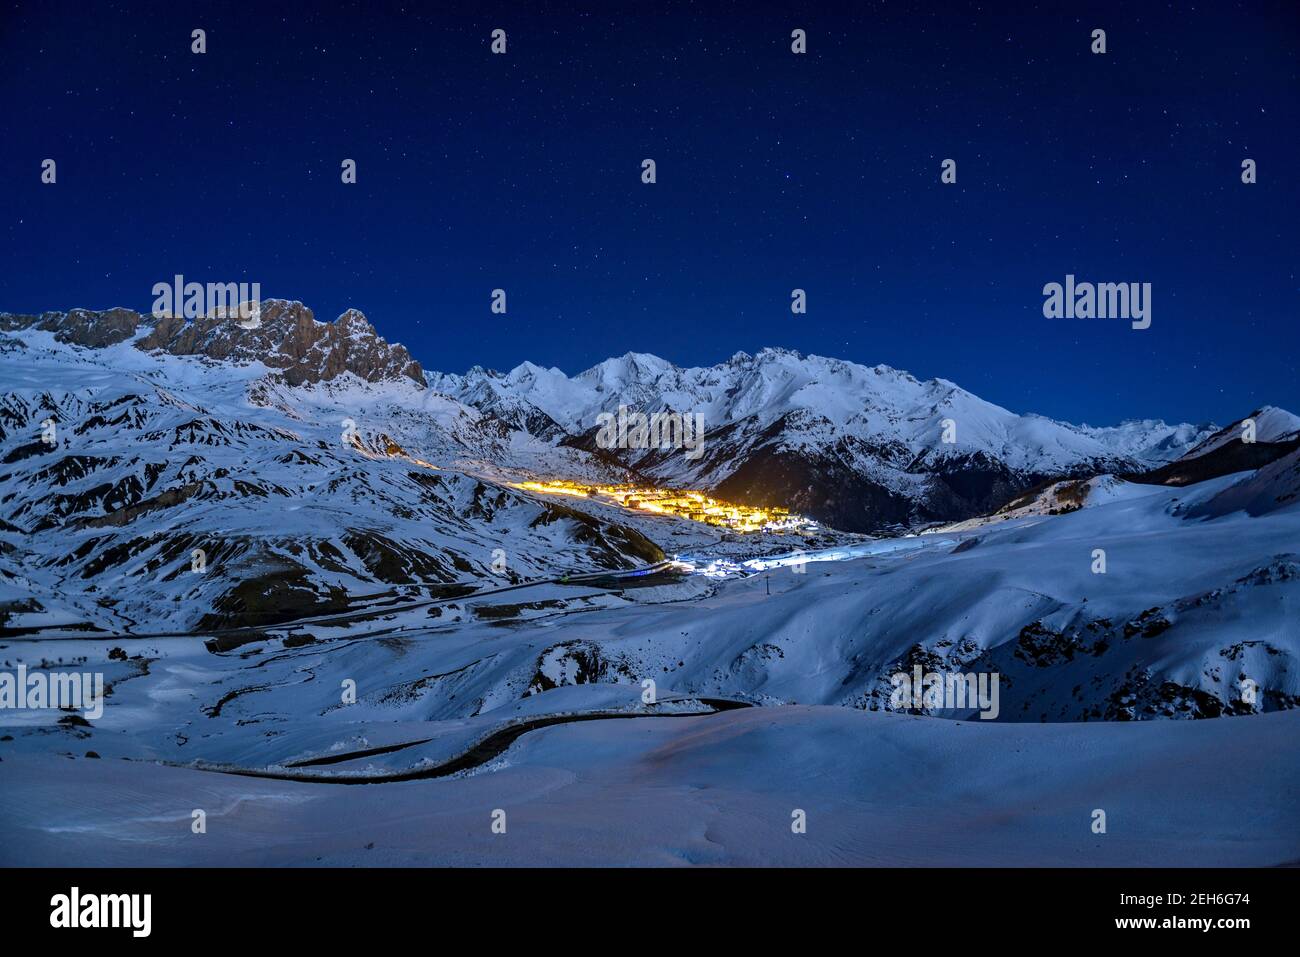 Formigal Ski Station and Tena Valley in a winter night (Aragon, Pyrenees, Spain) Stock Photo